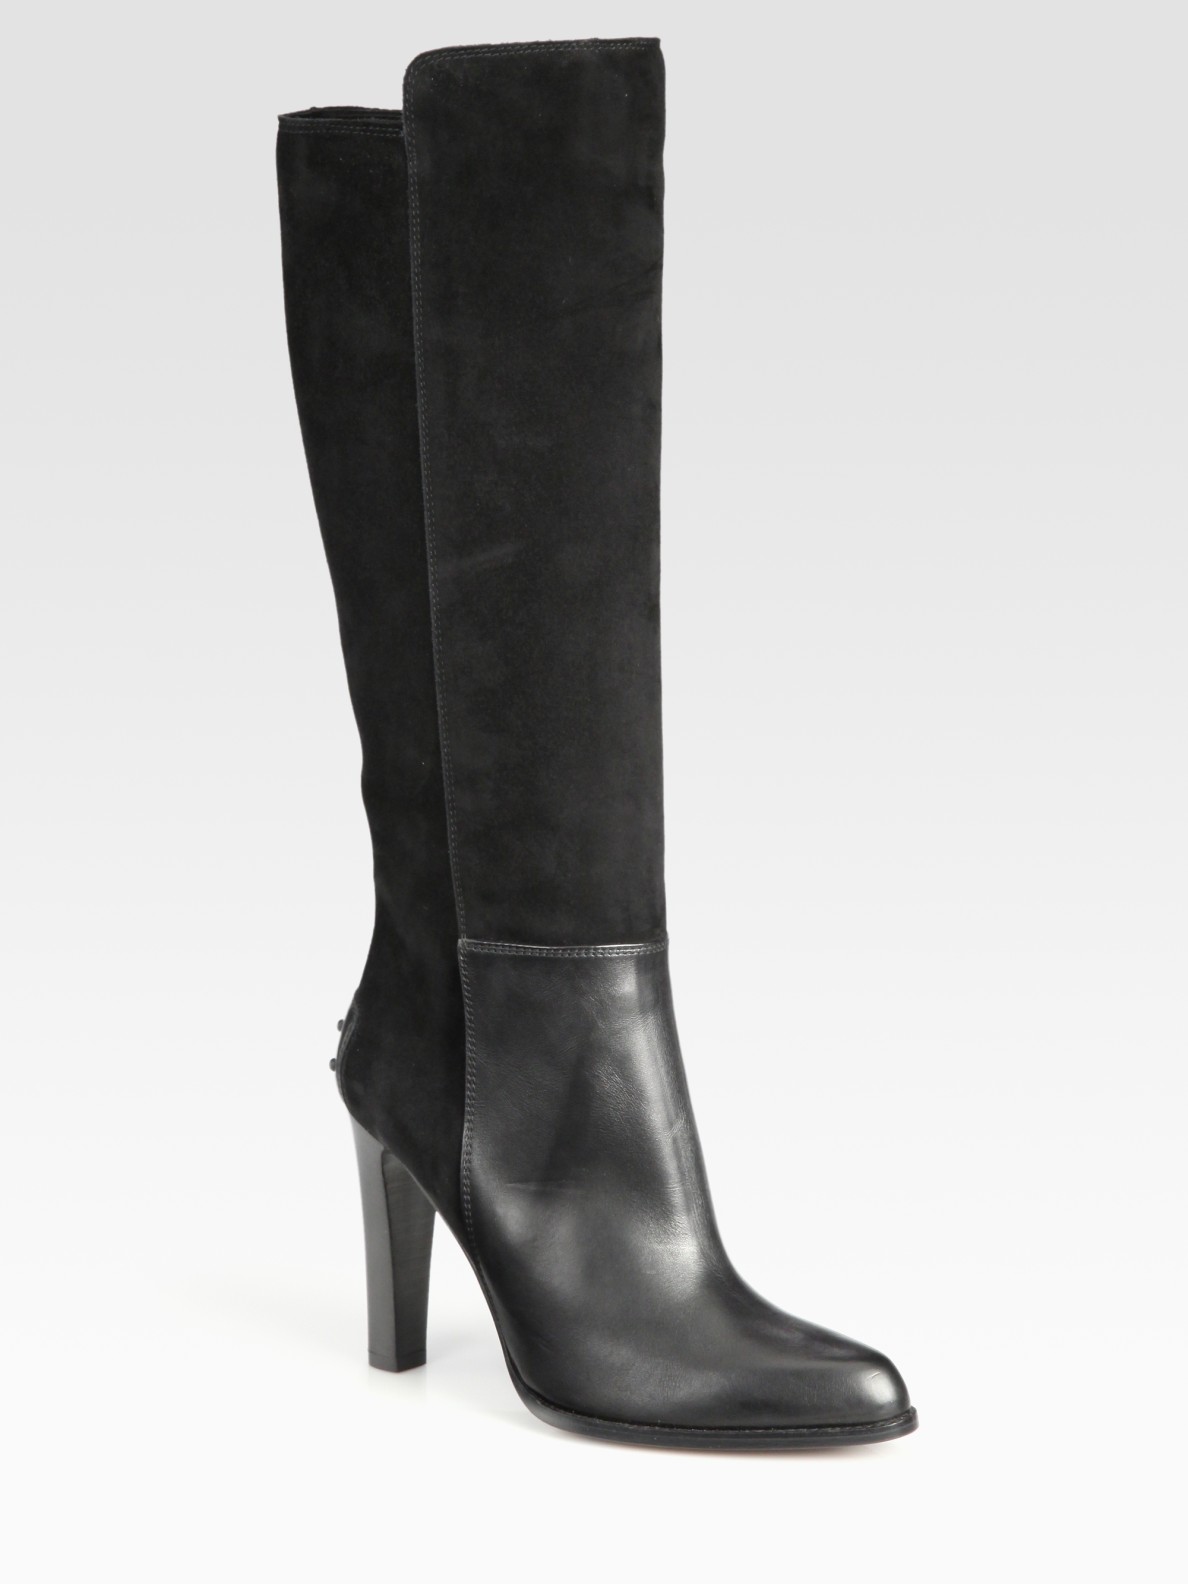 Tod's Suede and Leather Knee High Boots in Black | Lyst